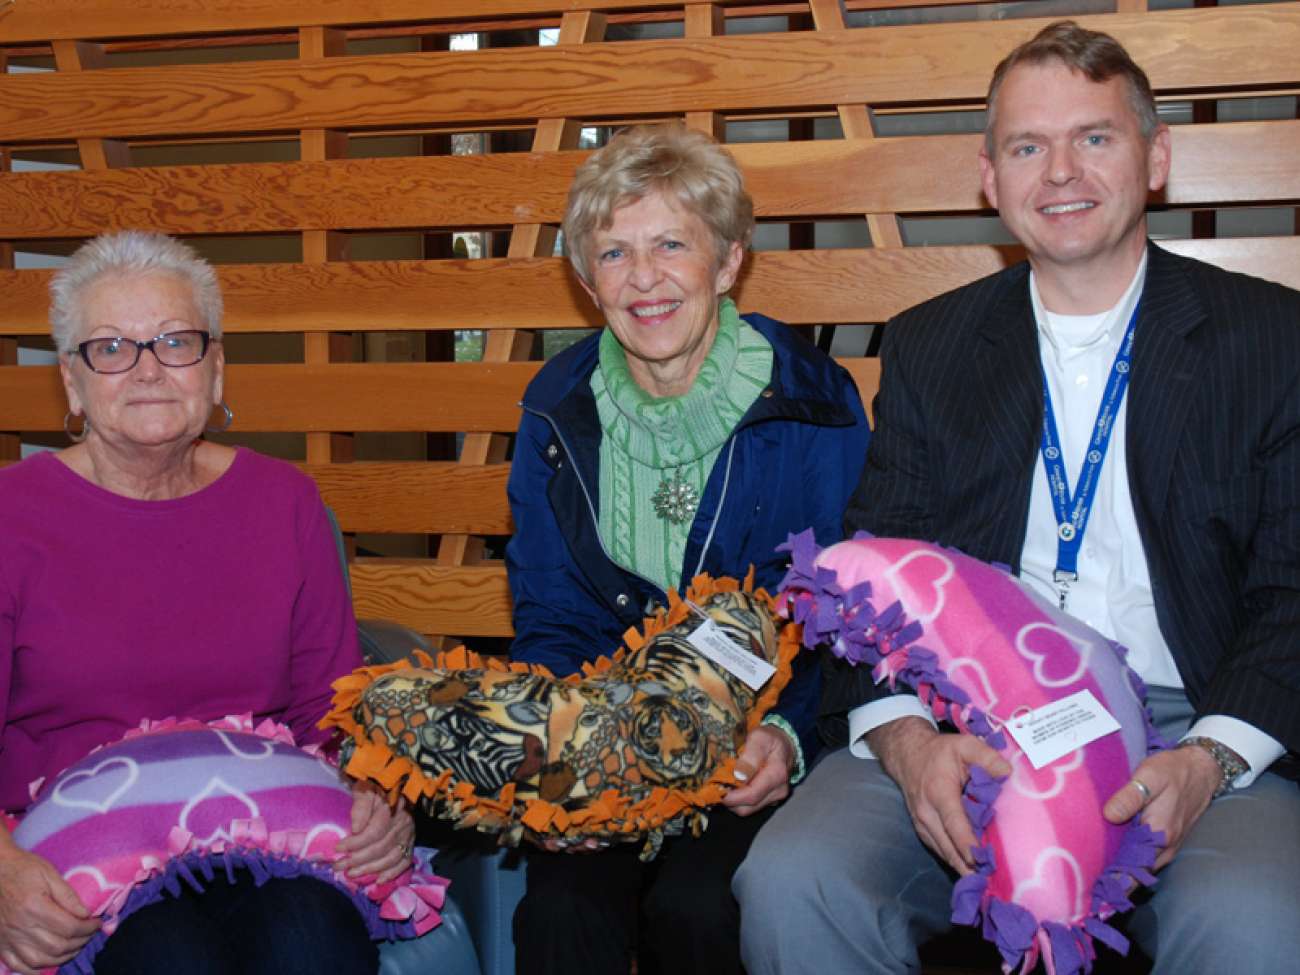 Shirley Chapman (centre) from the community of Foxboro Green drops off the latest donation of huggy pillows to patient Hildegard Anderson (left) and GRH's Owen Roszell (right)